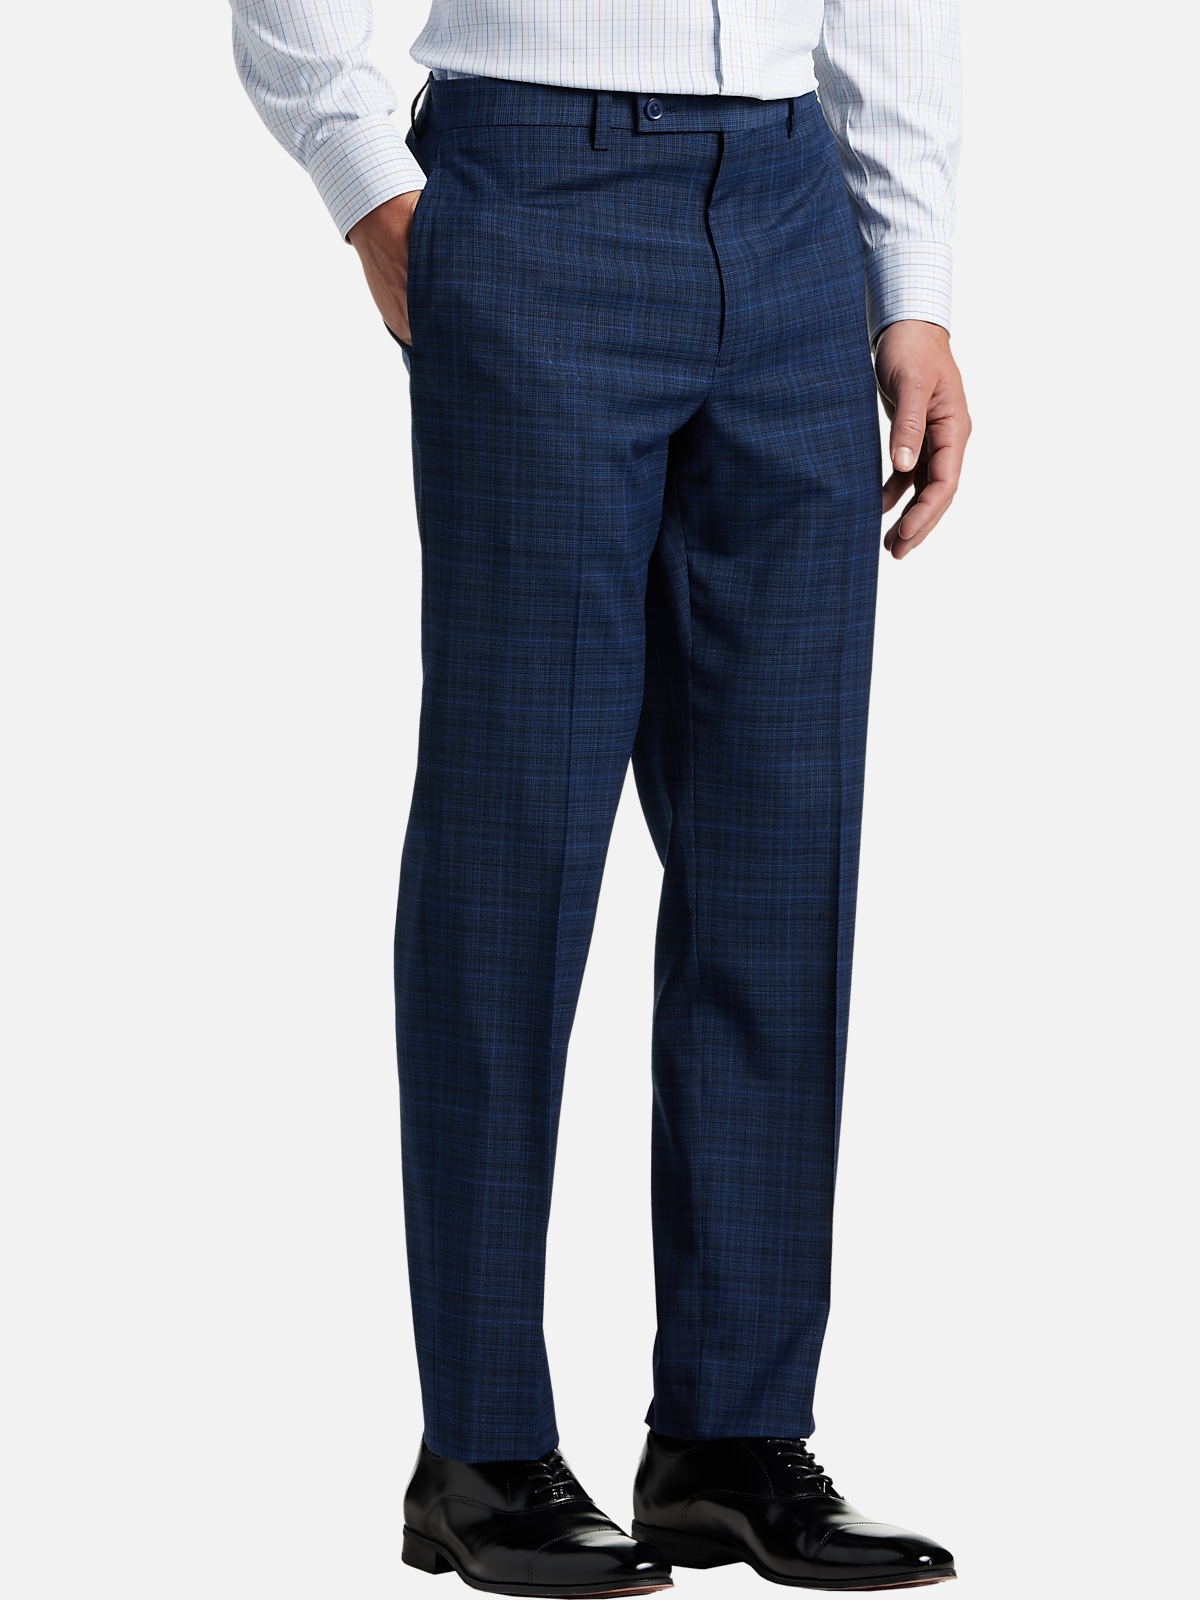 Michael Strahan Classic Fit Suit Separate Pants | All Clearance $39.99 ...